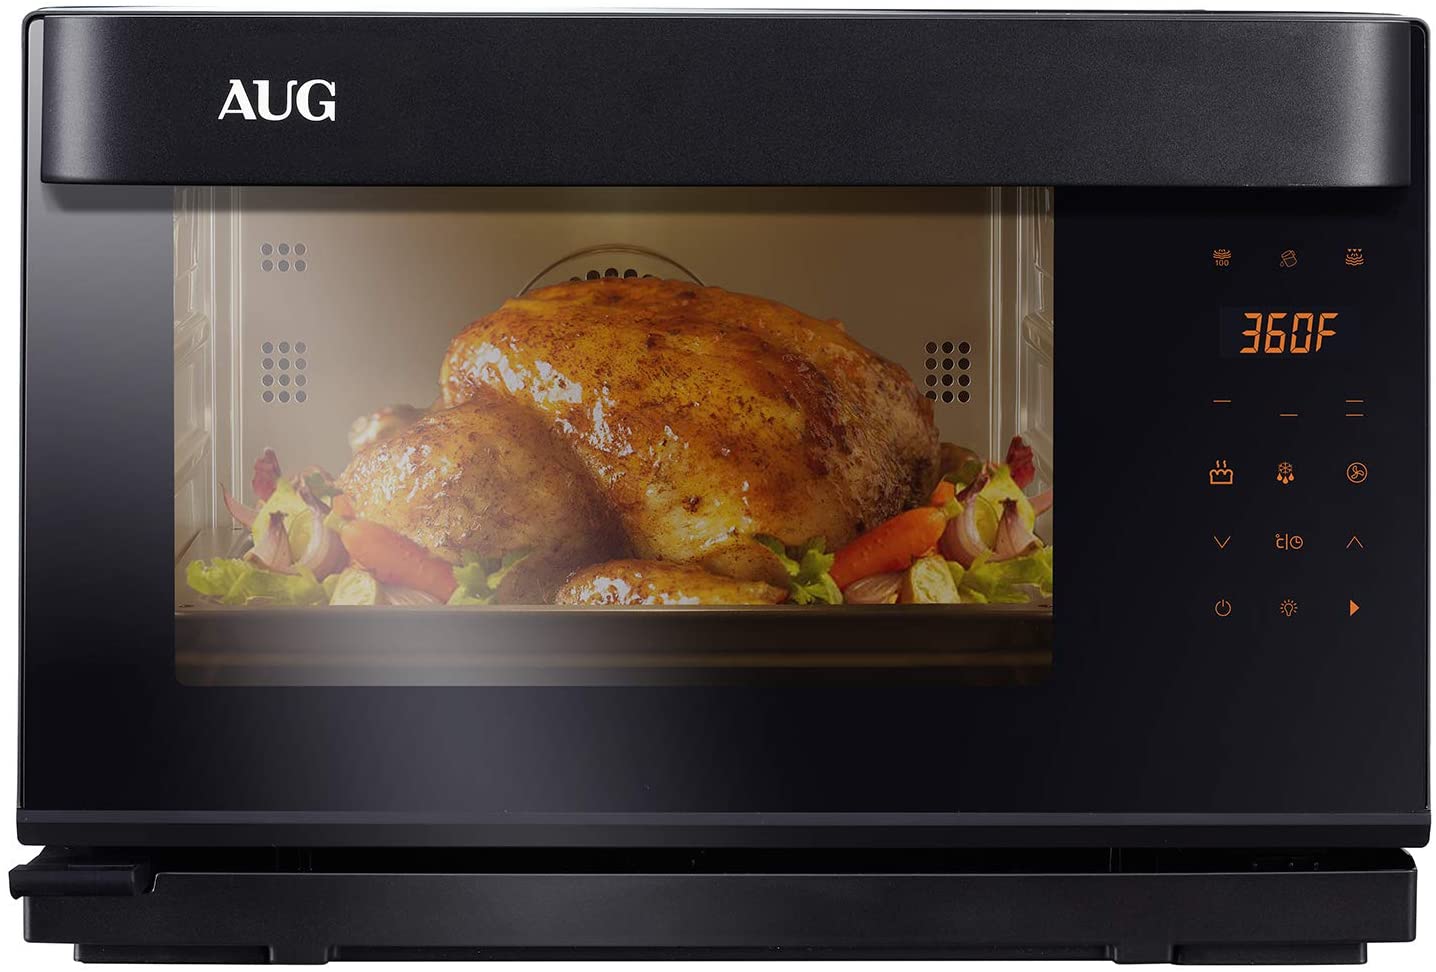 AUG Countertop Steam Convection Oven & Grill